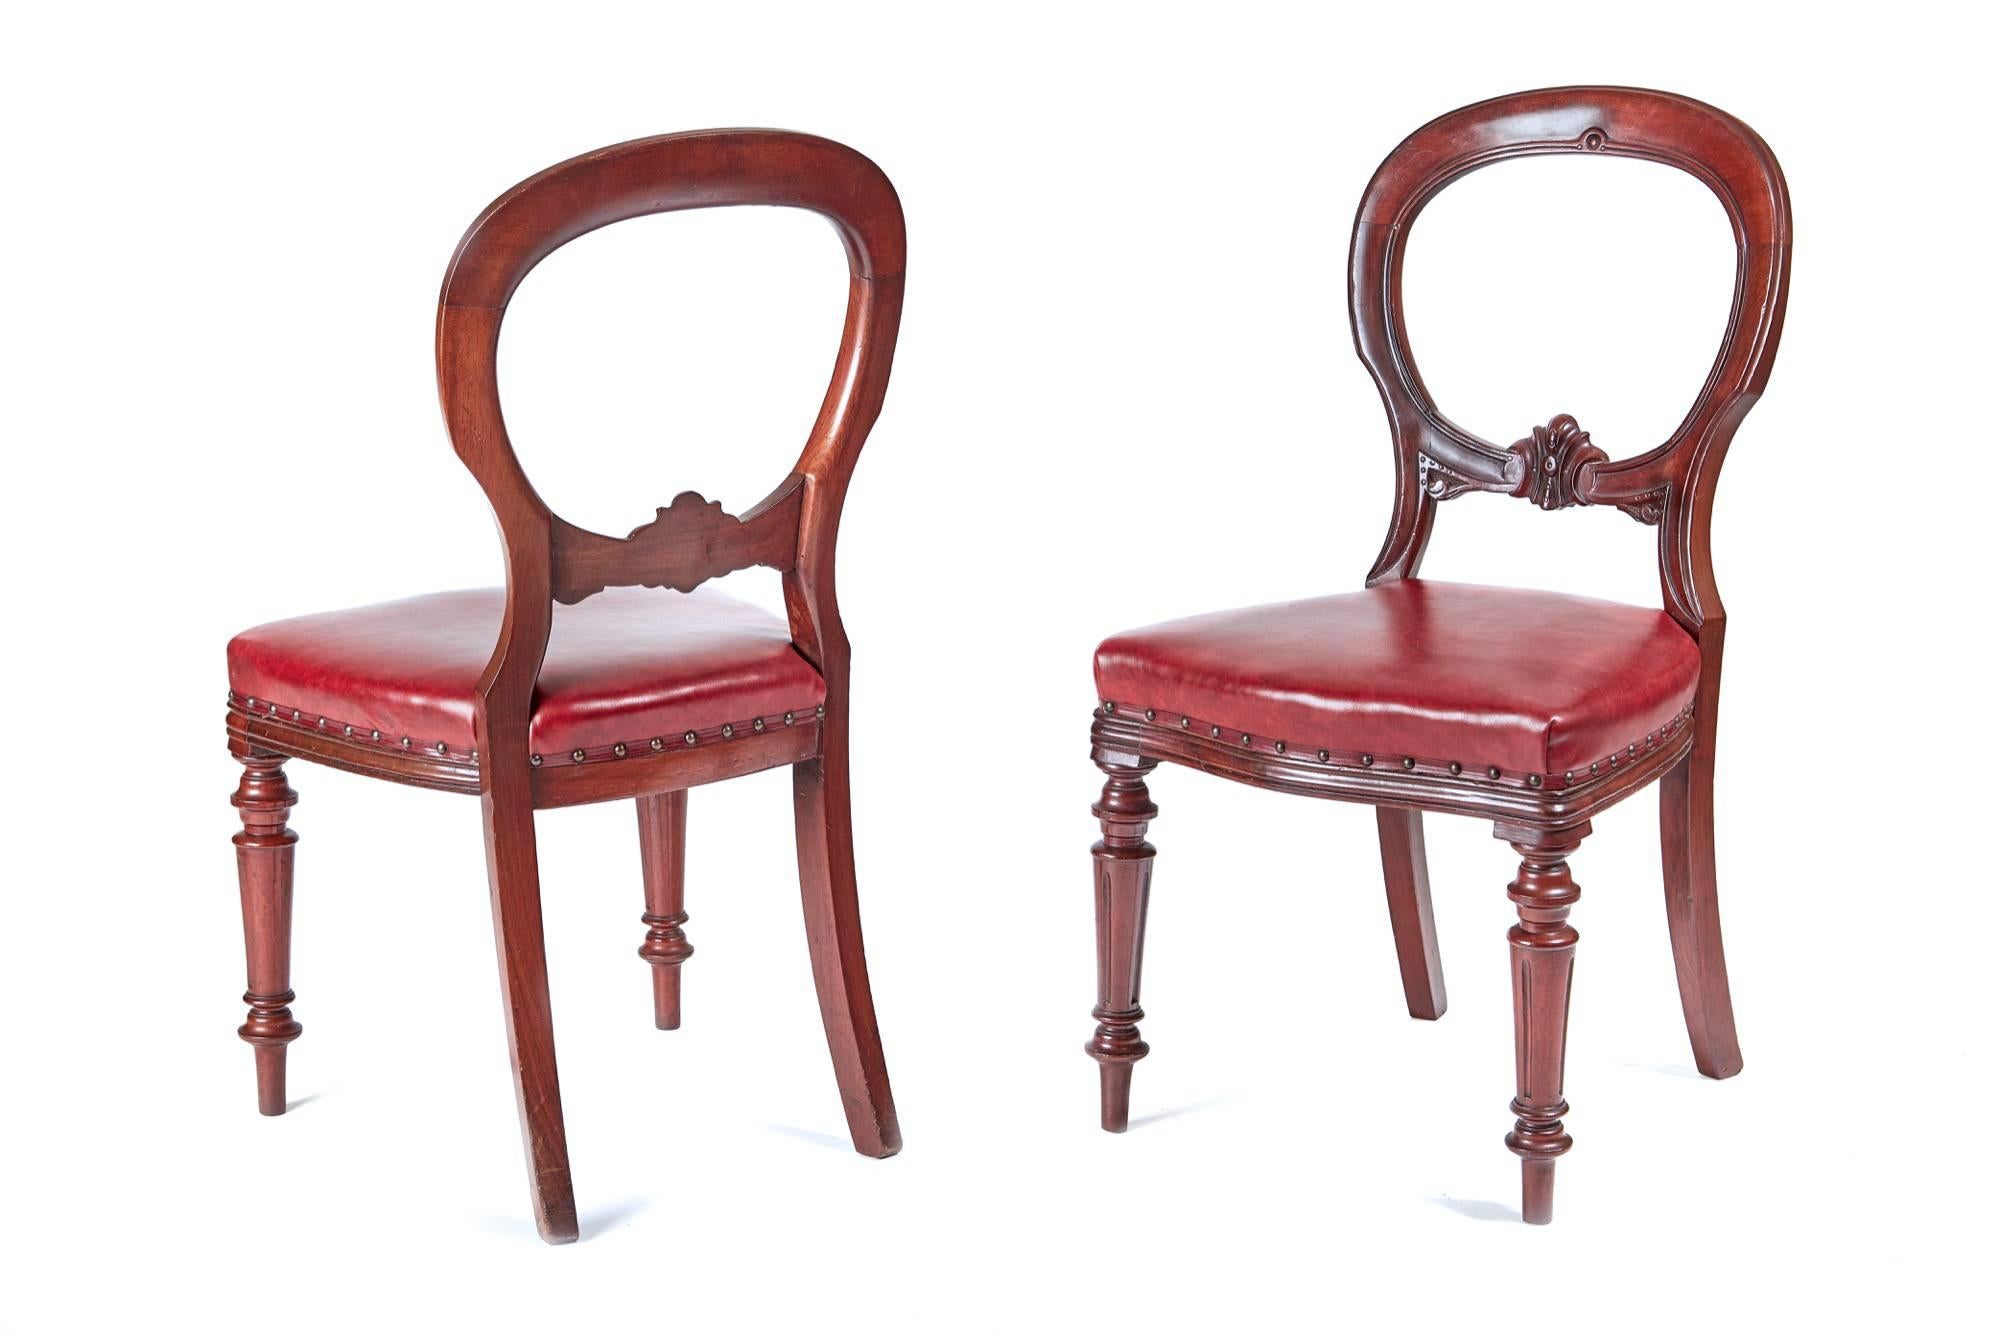 Quality set of six Victorian mahogany balloon back dining chairs, the circular reeded back has a carved lower rail, standing on turned front legs and outswept back legs,

circa 1860.

Measures: Height 35